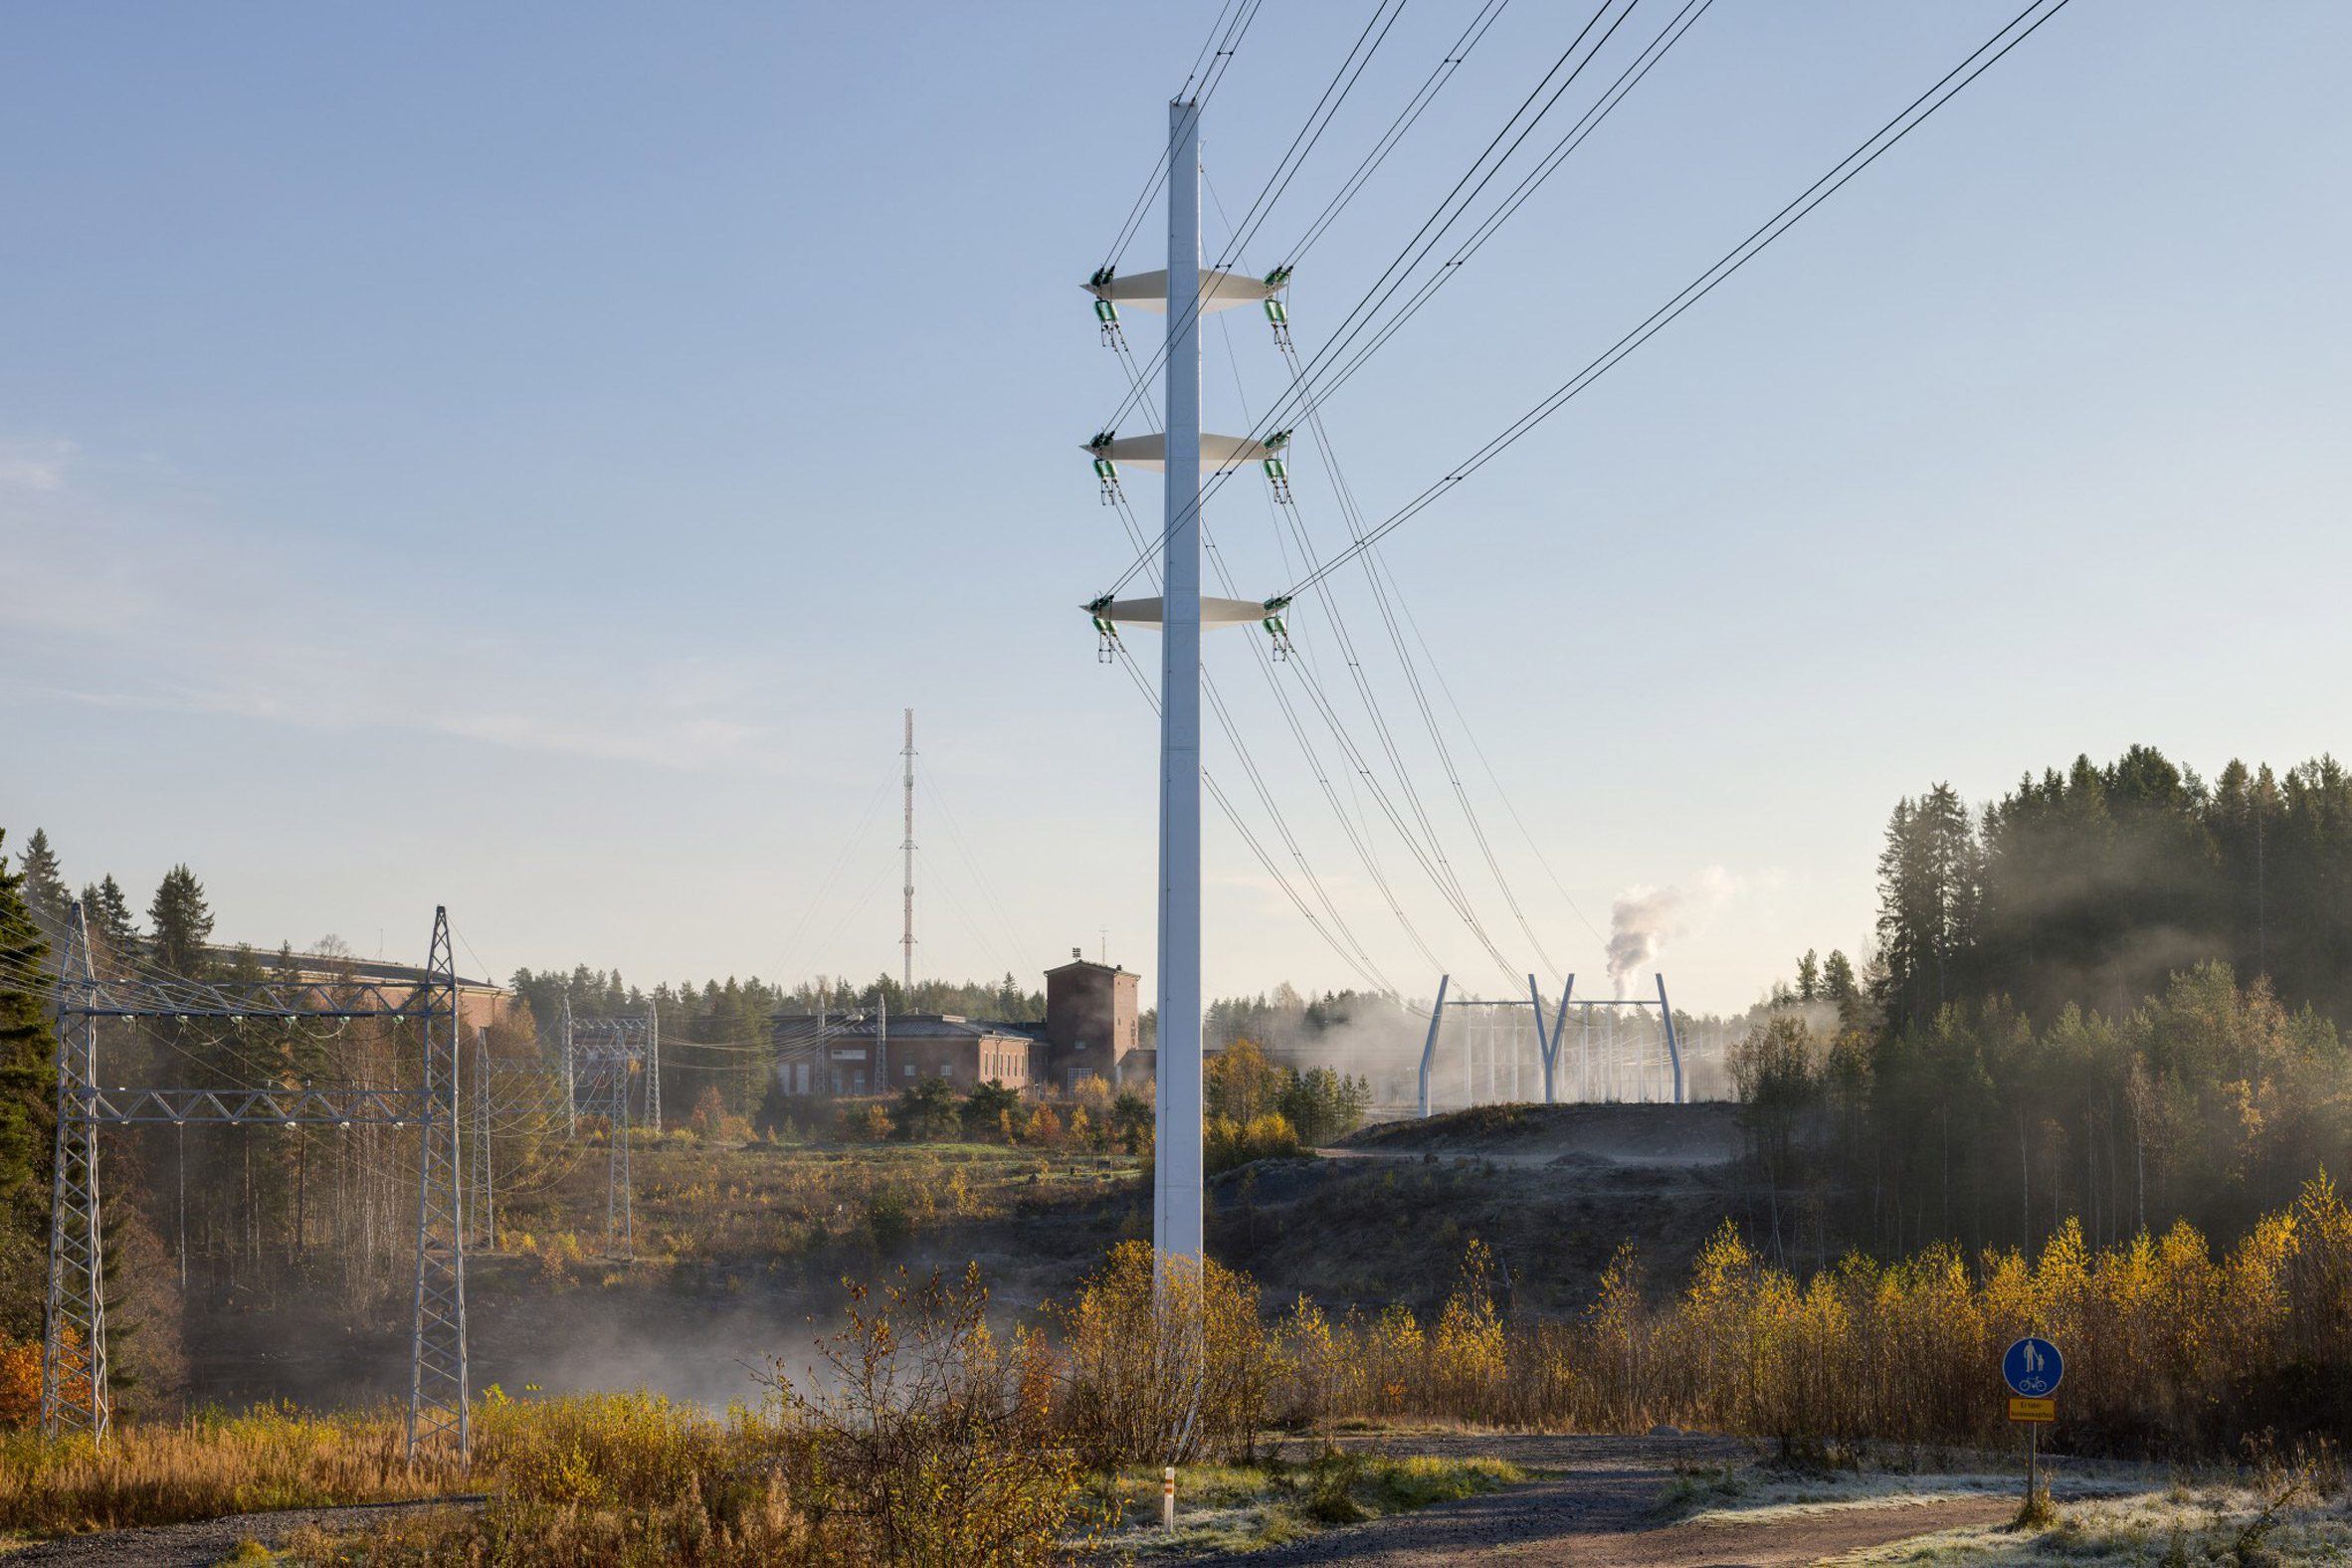 The electricity infrastructure is in Imatra, Finland